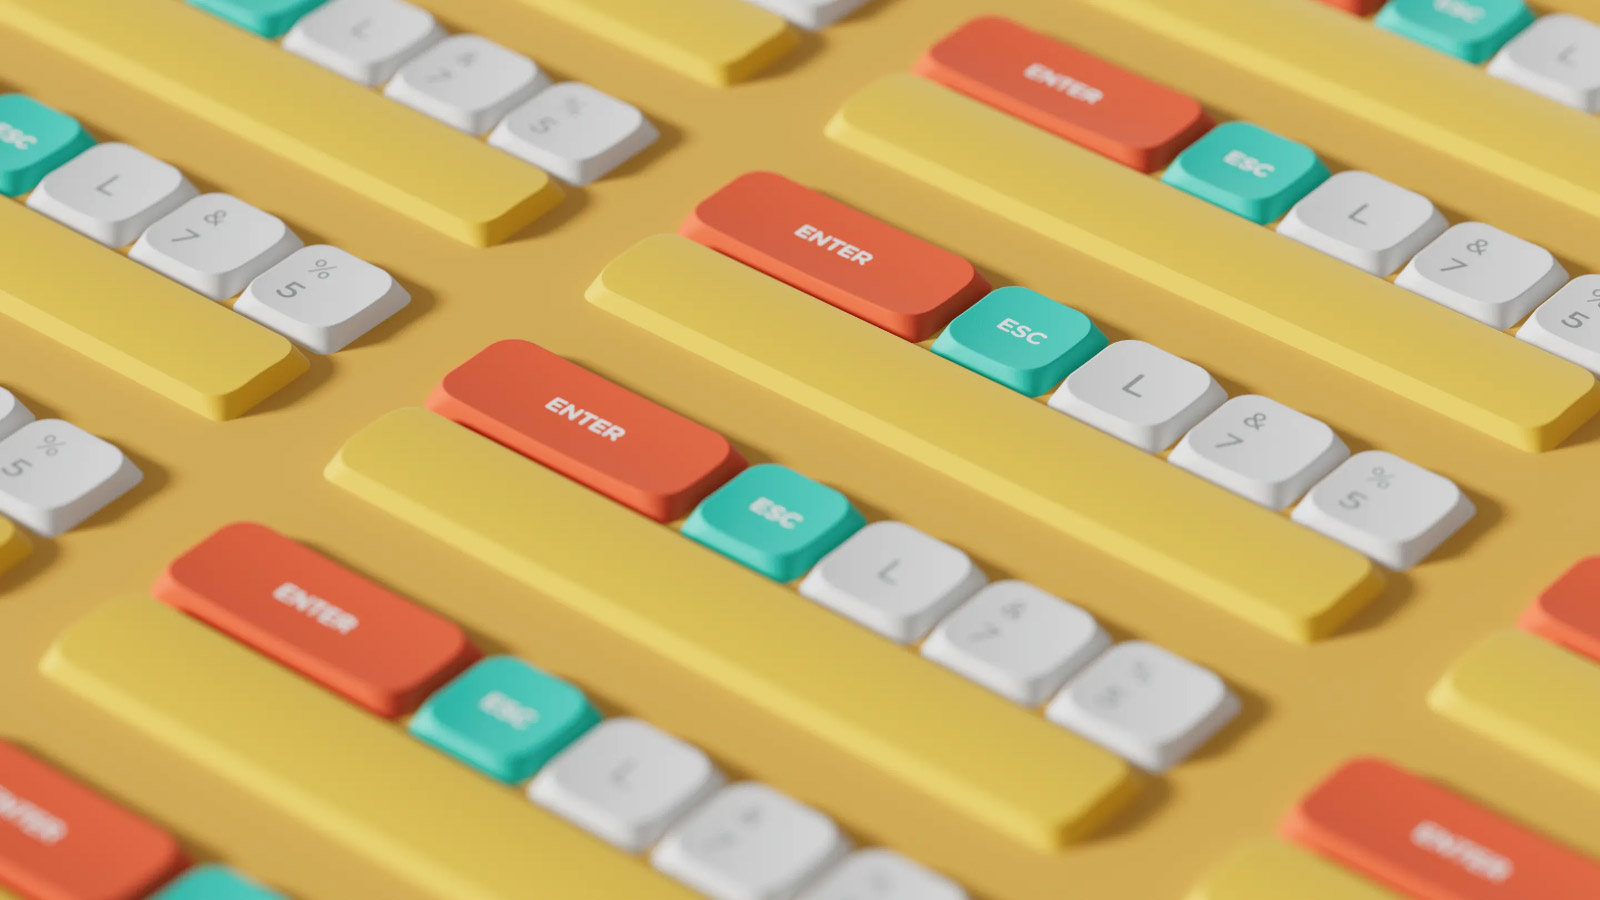 nuphy-keycaps-in-tray